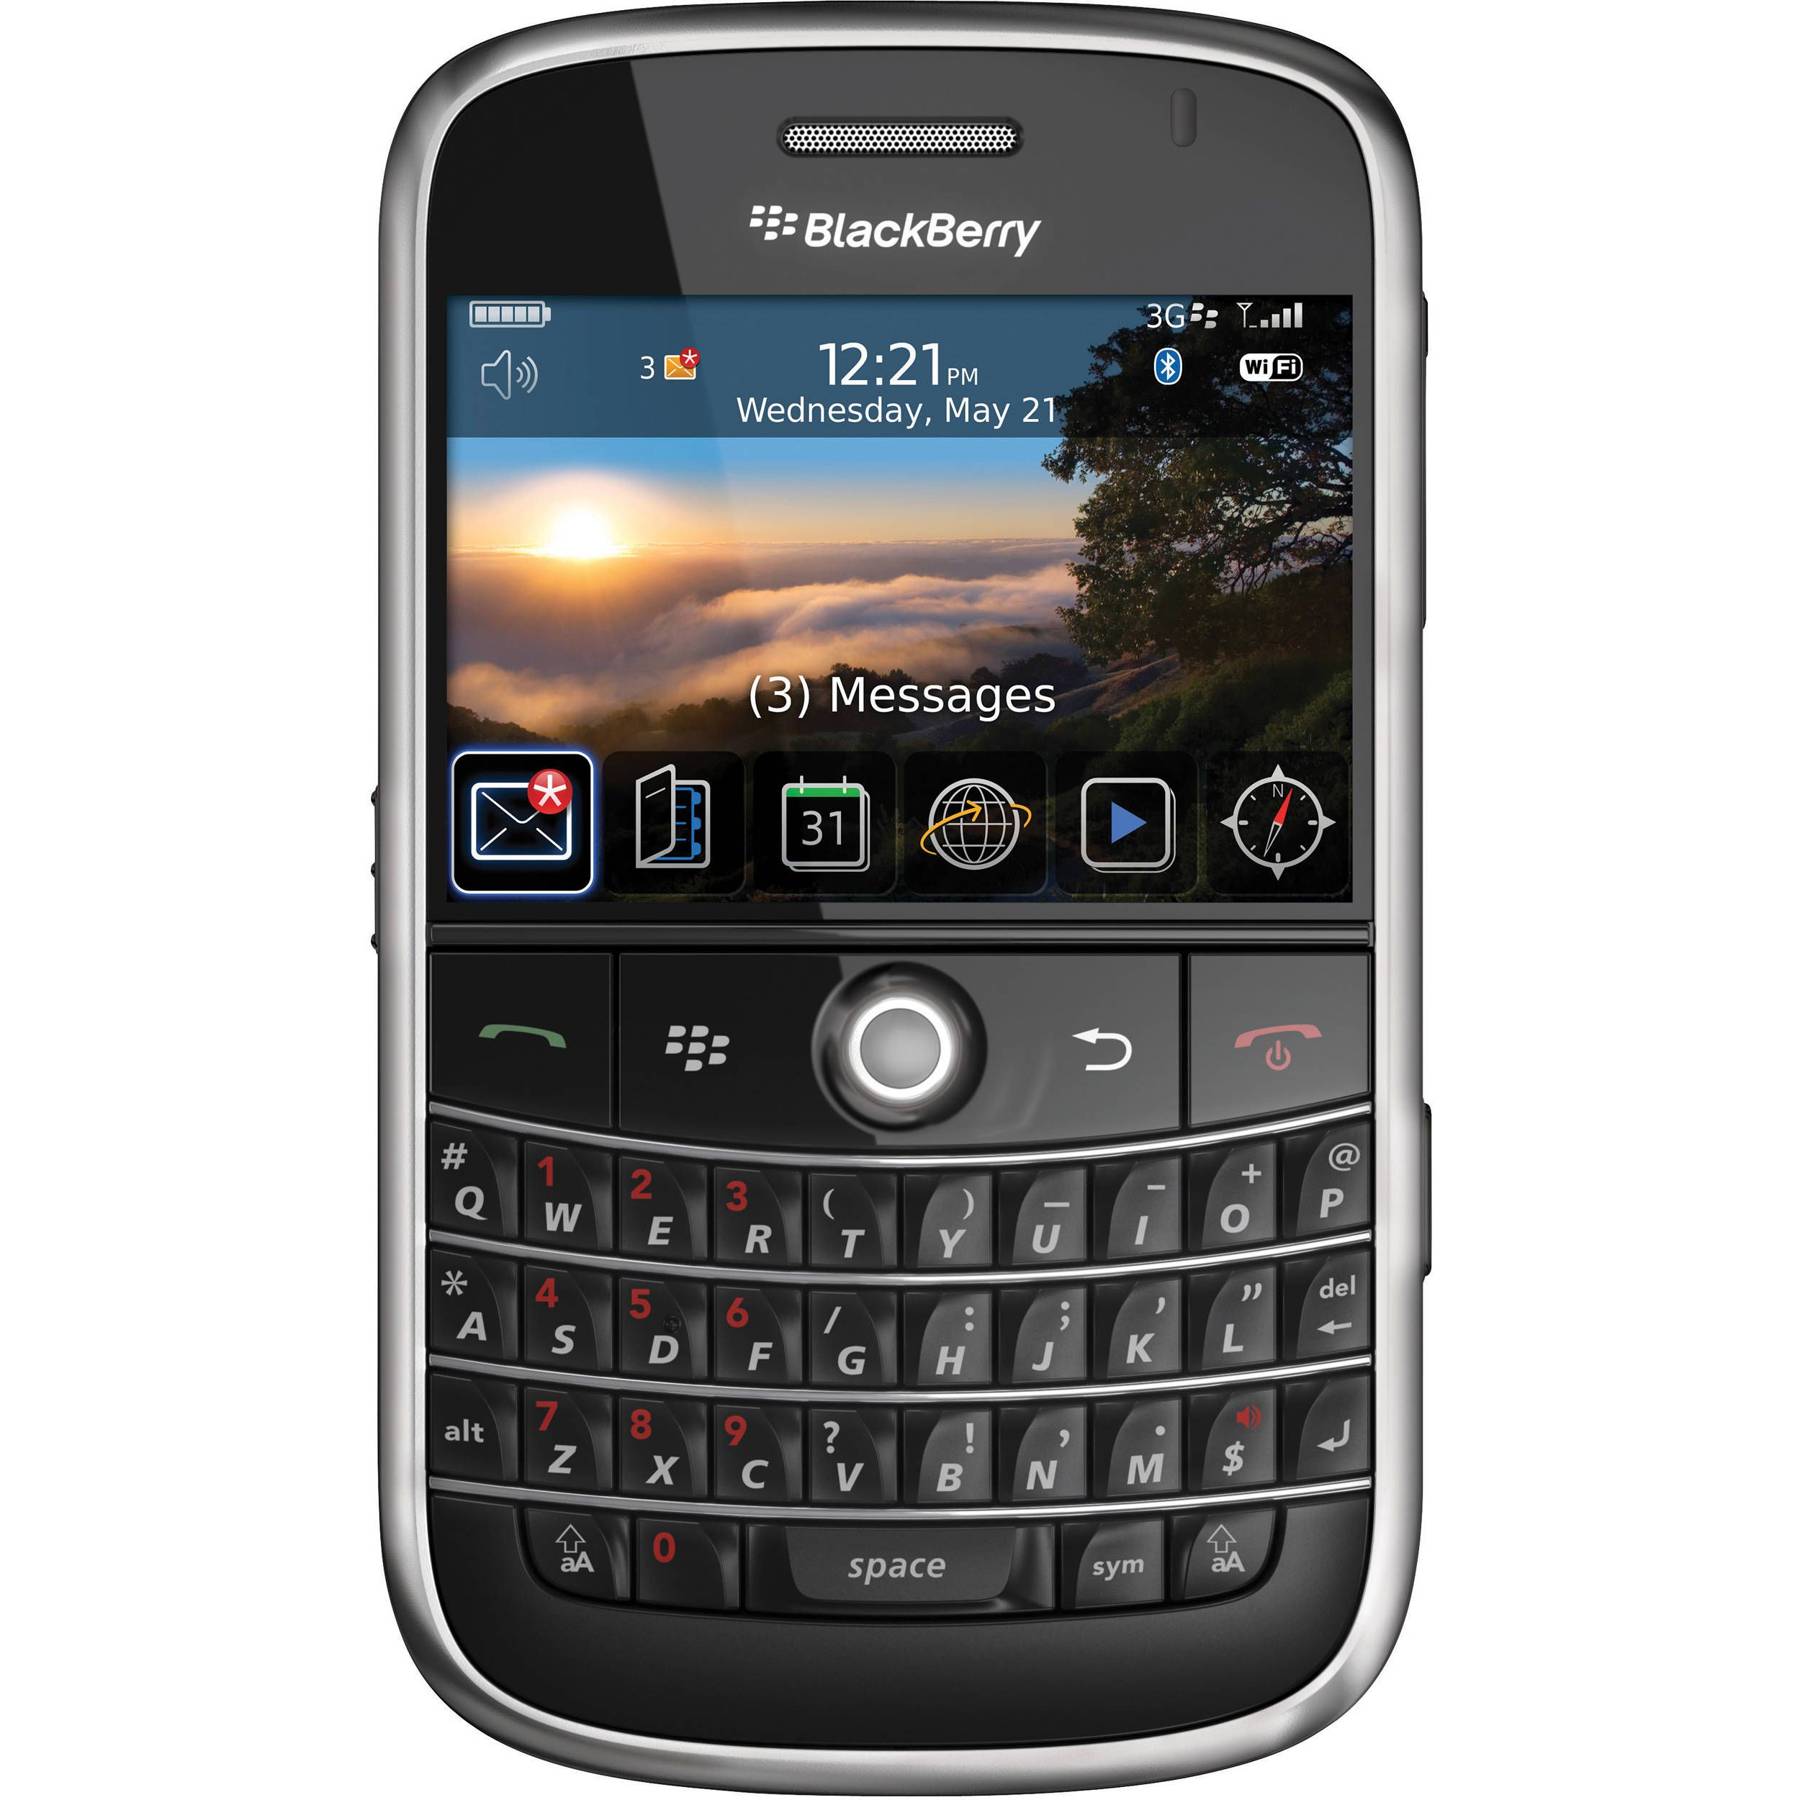 BlackBerry phones in pictures | WIRED UK